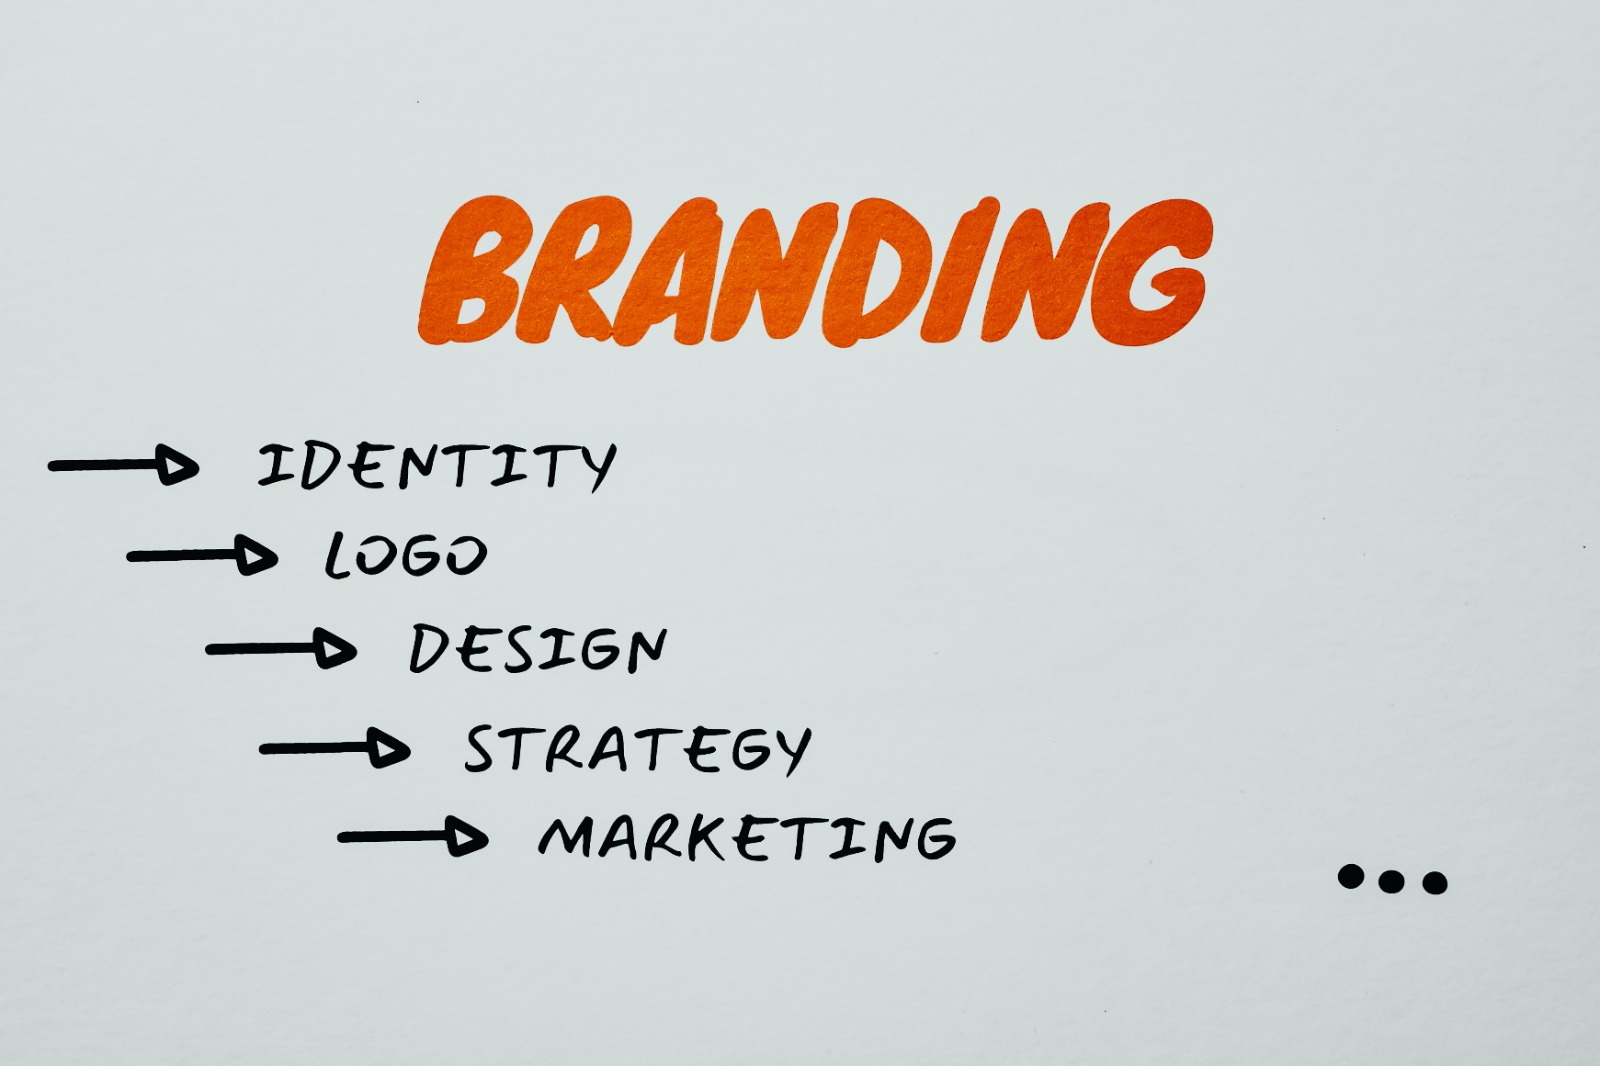 Brand Identity in the Digital Space